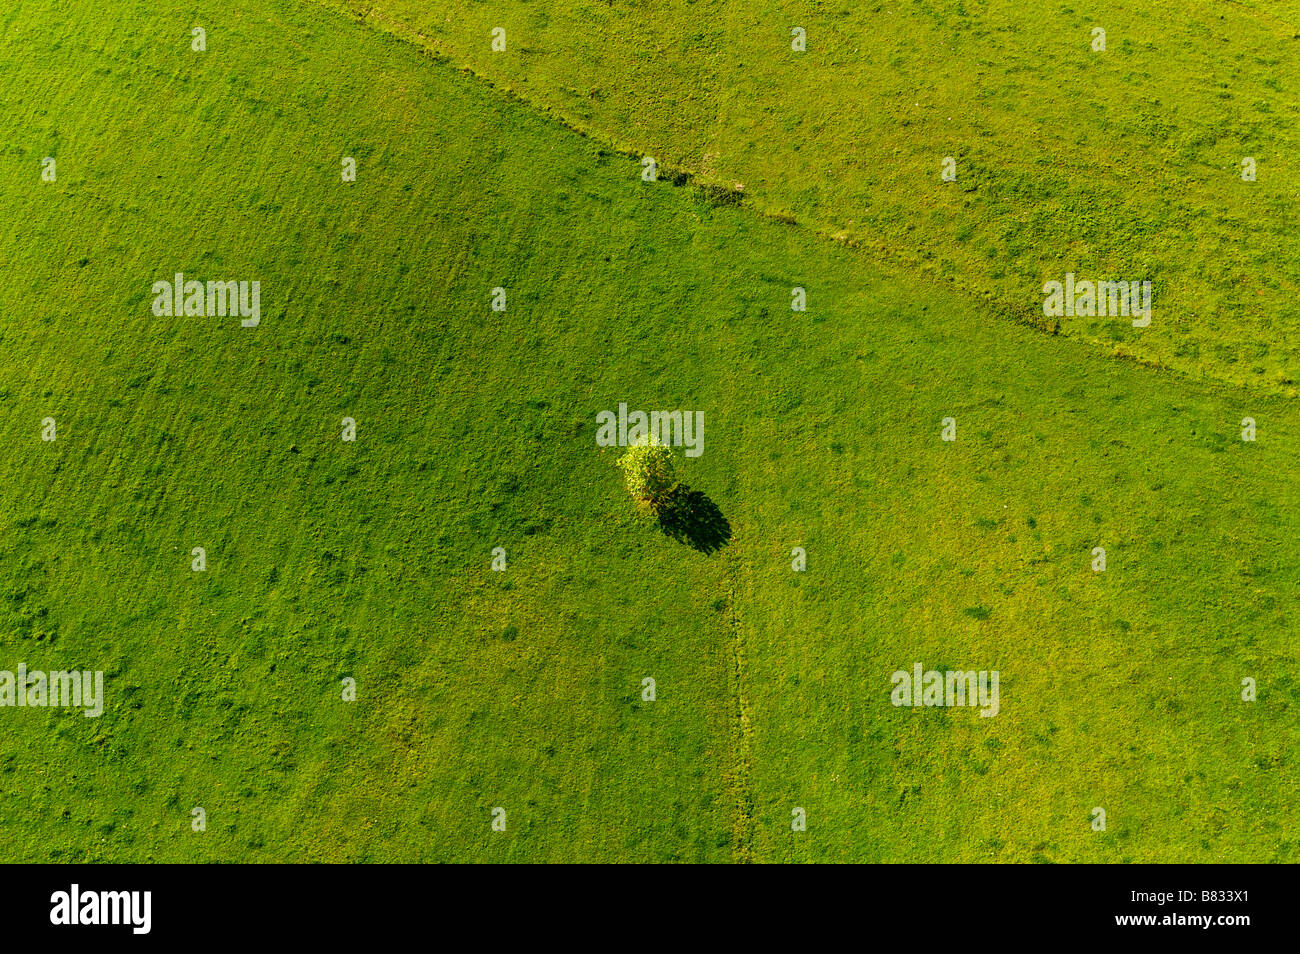 Tree lost in the middle of a field Stock Photo